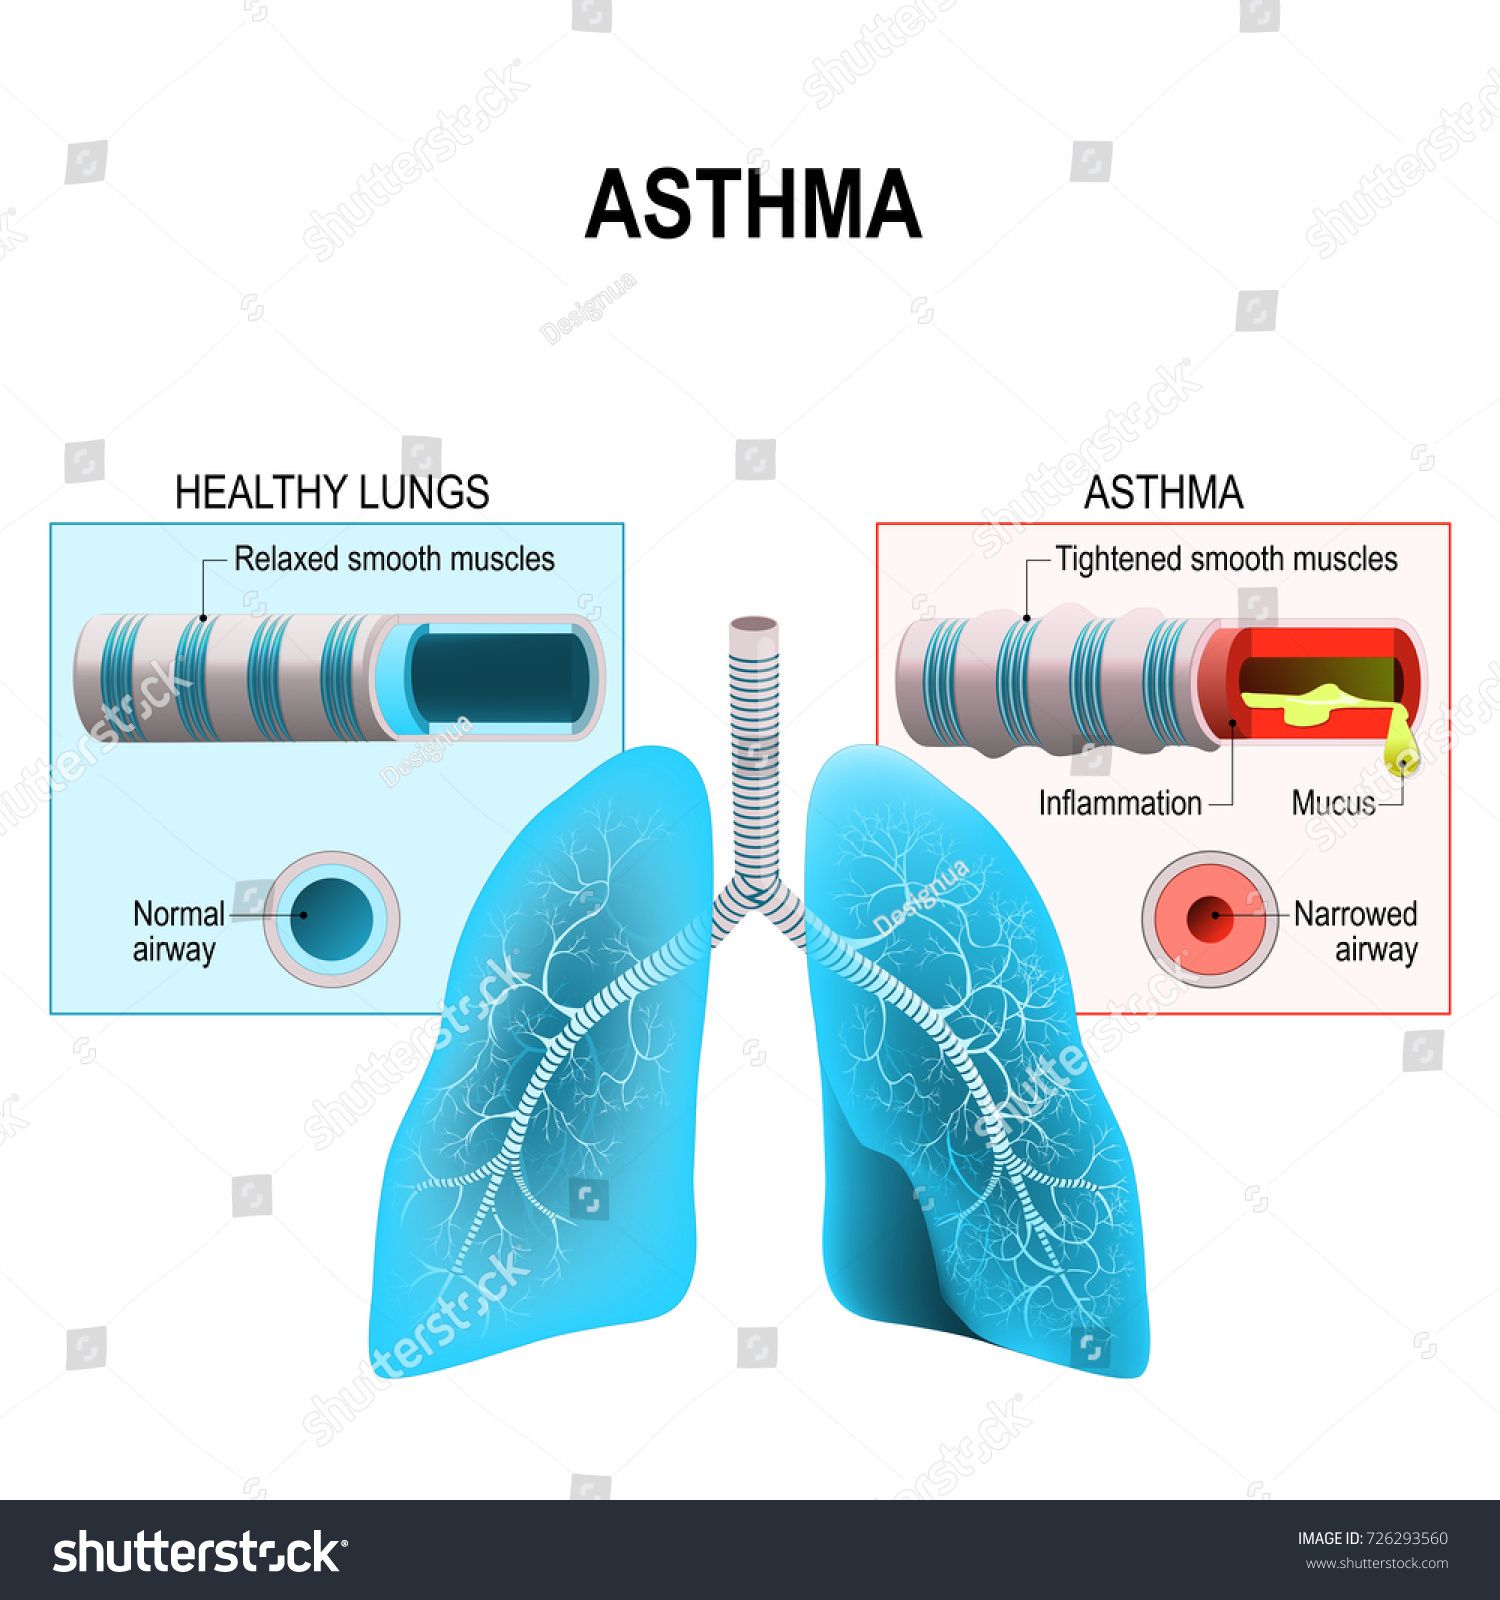 Asthma is a chronic inflammatory disease of the airways ...